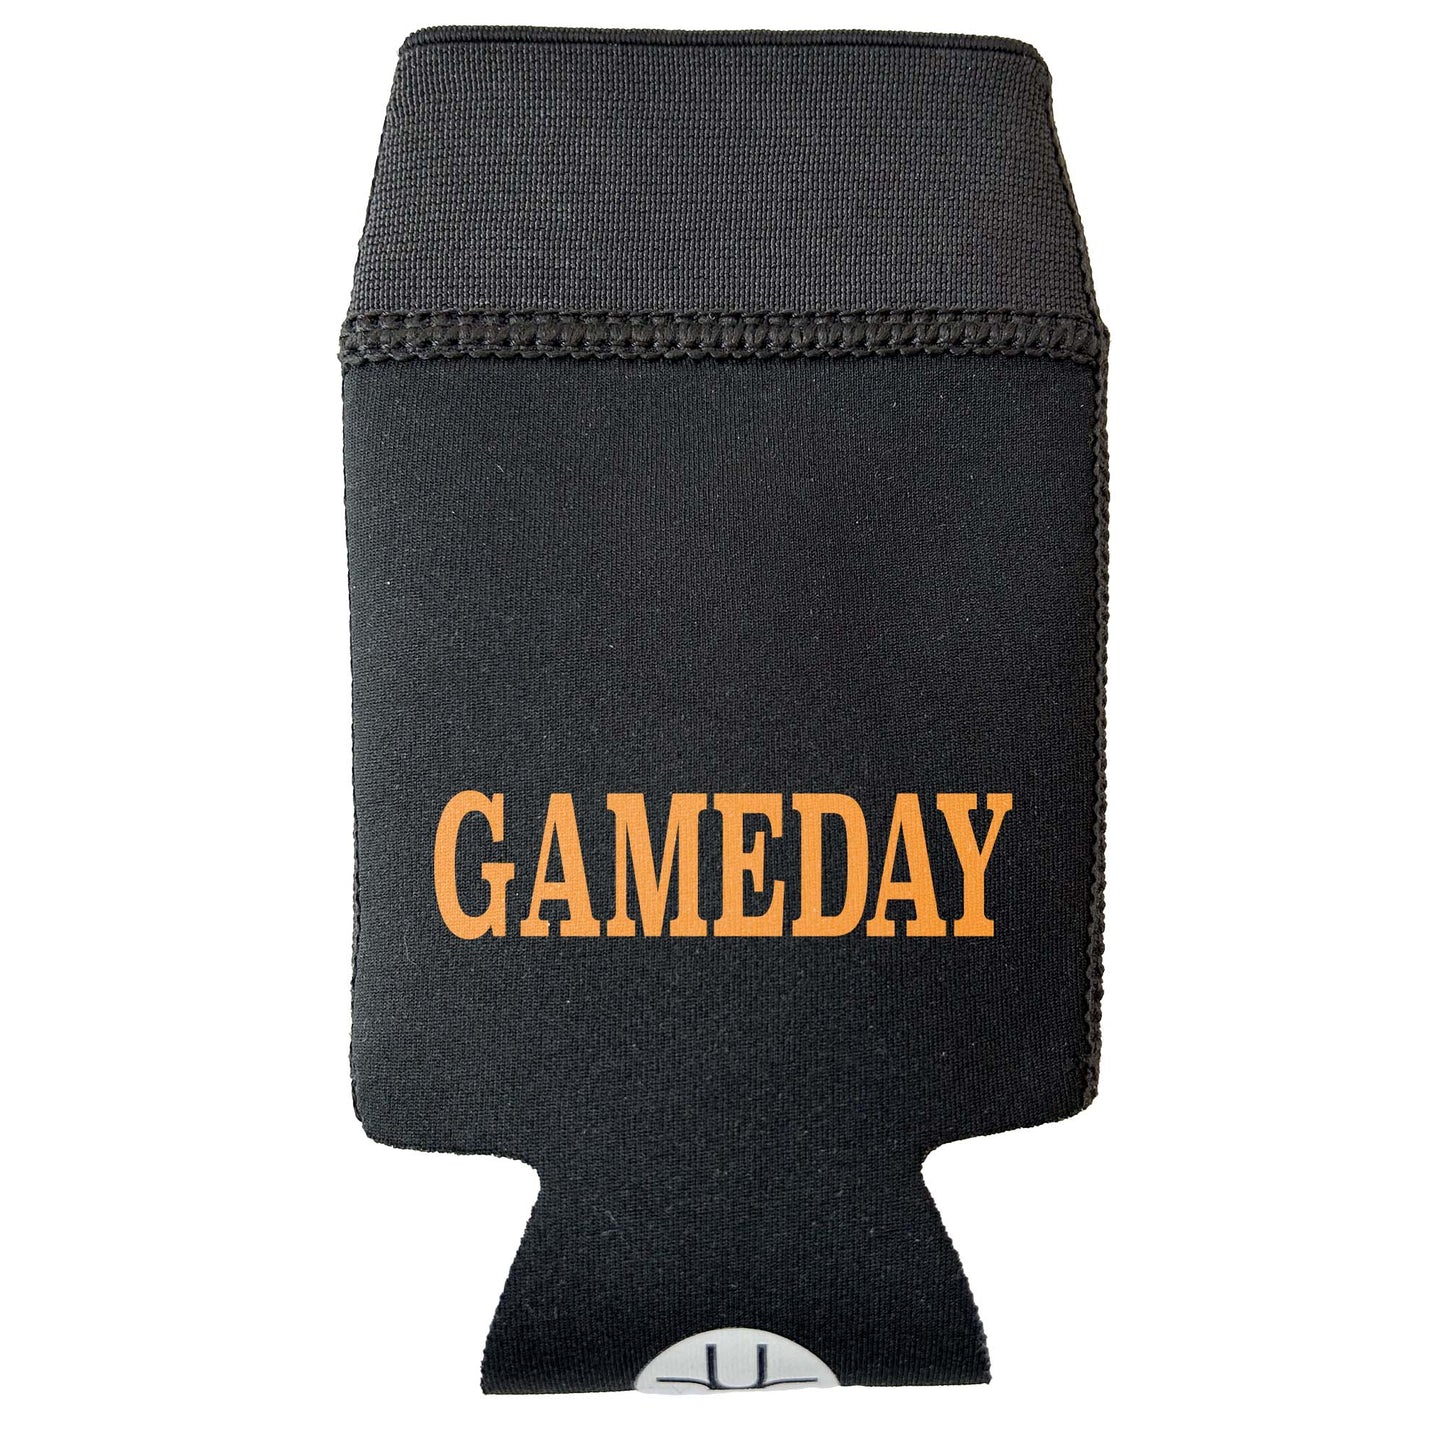 All Black Candabra Hero, Black Neoprene Sleeve with Black elastic.  Embellished with the word GAMEDAY in bright orange all cap block letters.